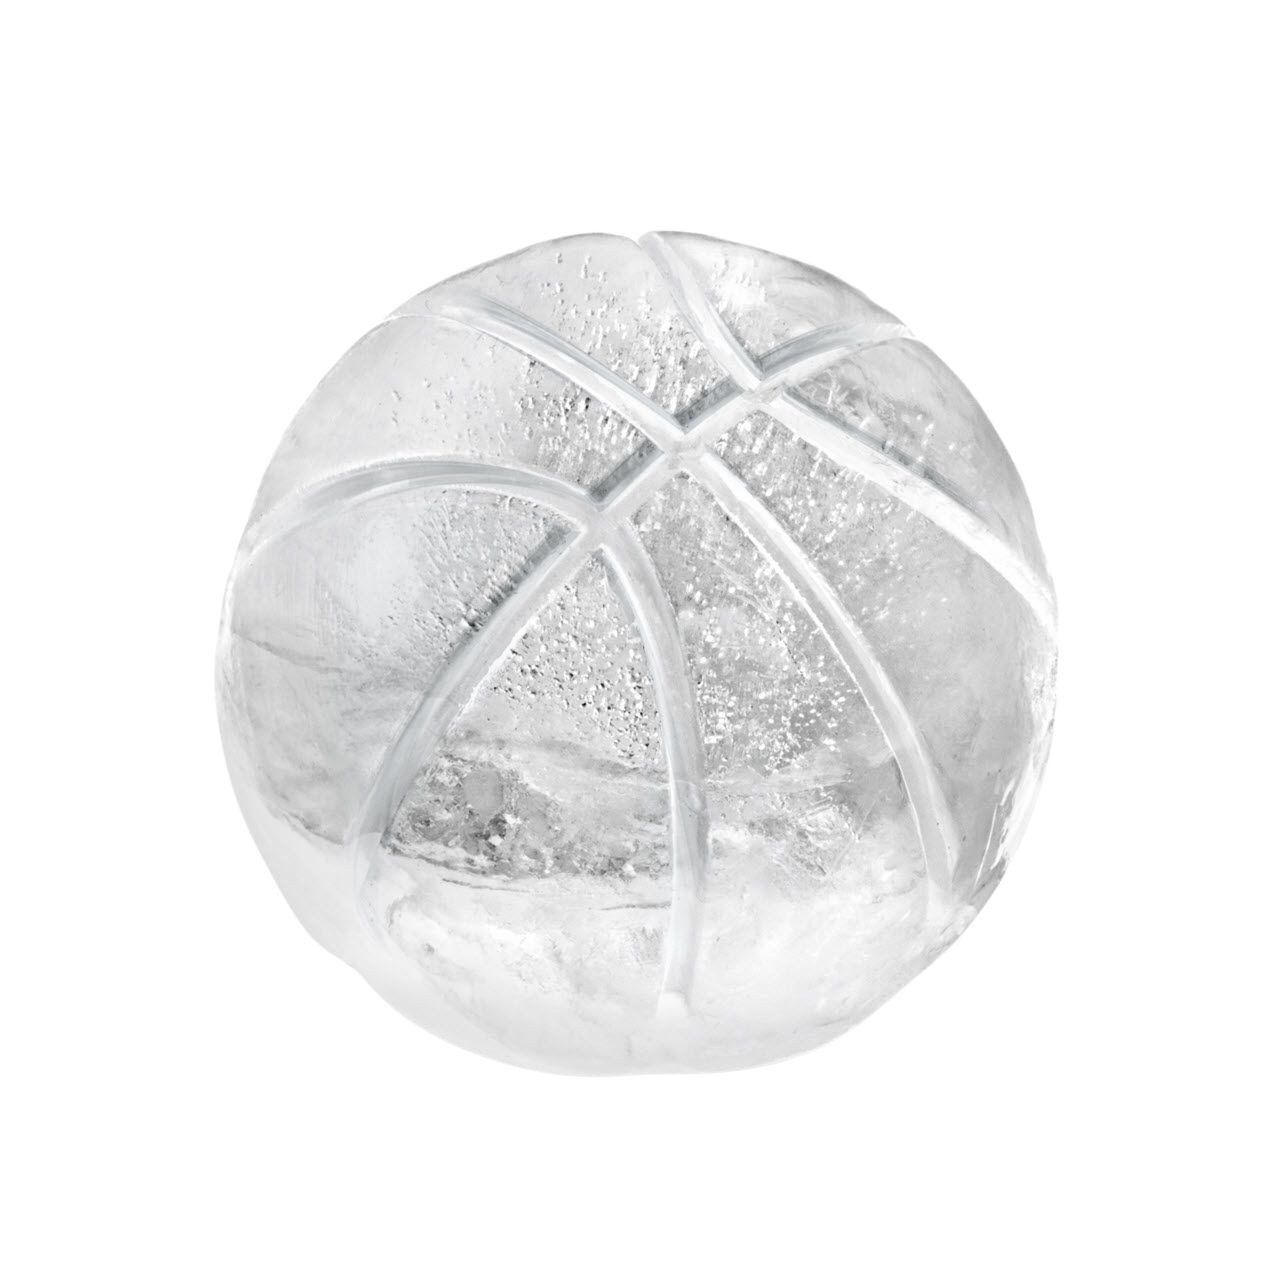 Tovolo Set of 3 Golf Ball 2 1/2 shaped Ice Molds Sphere Mold for